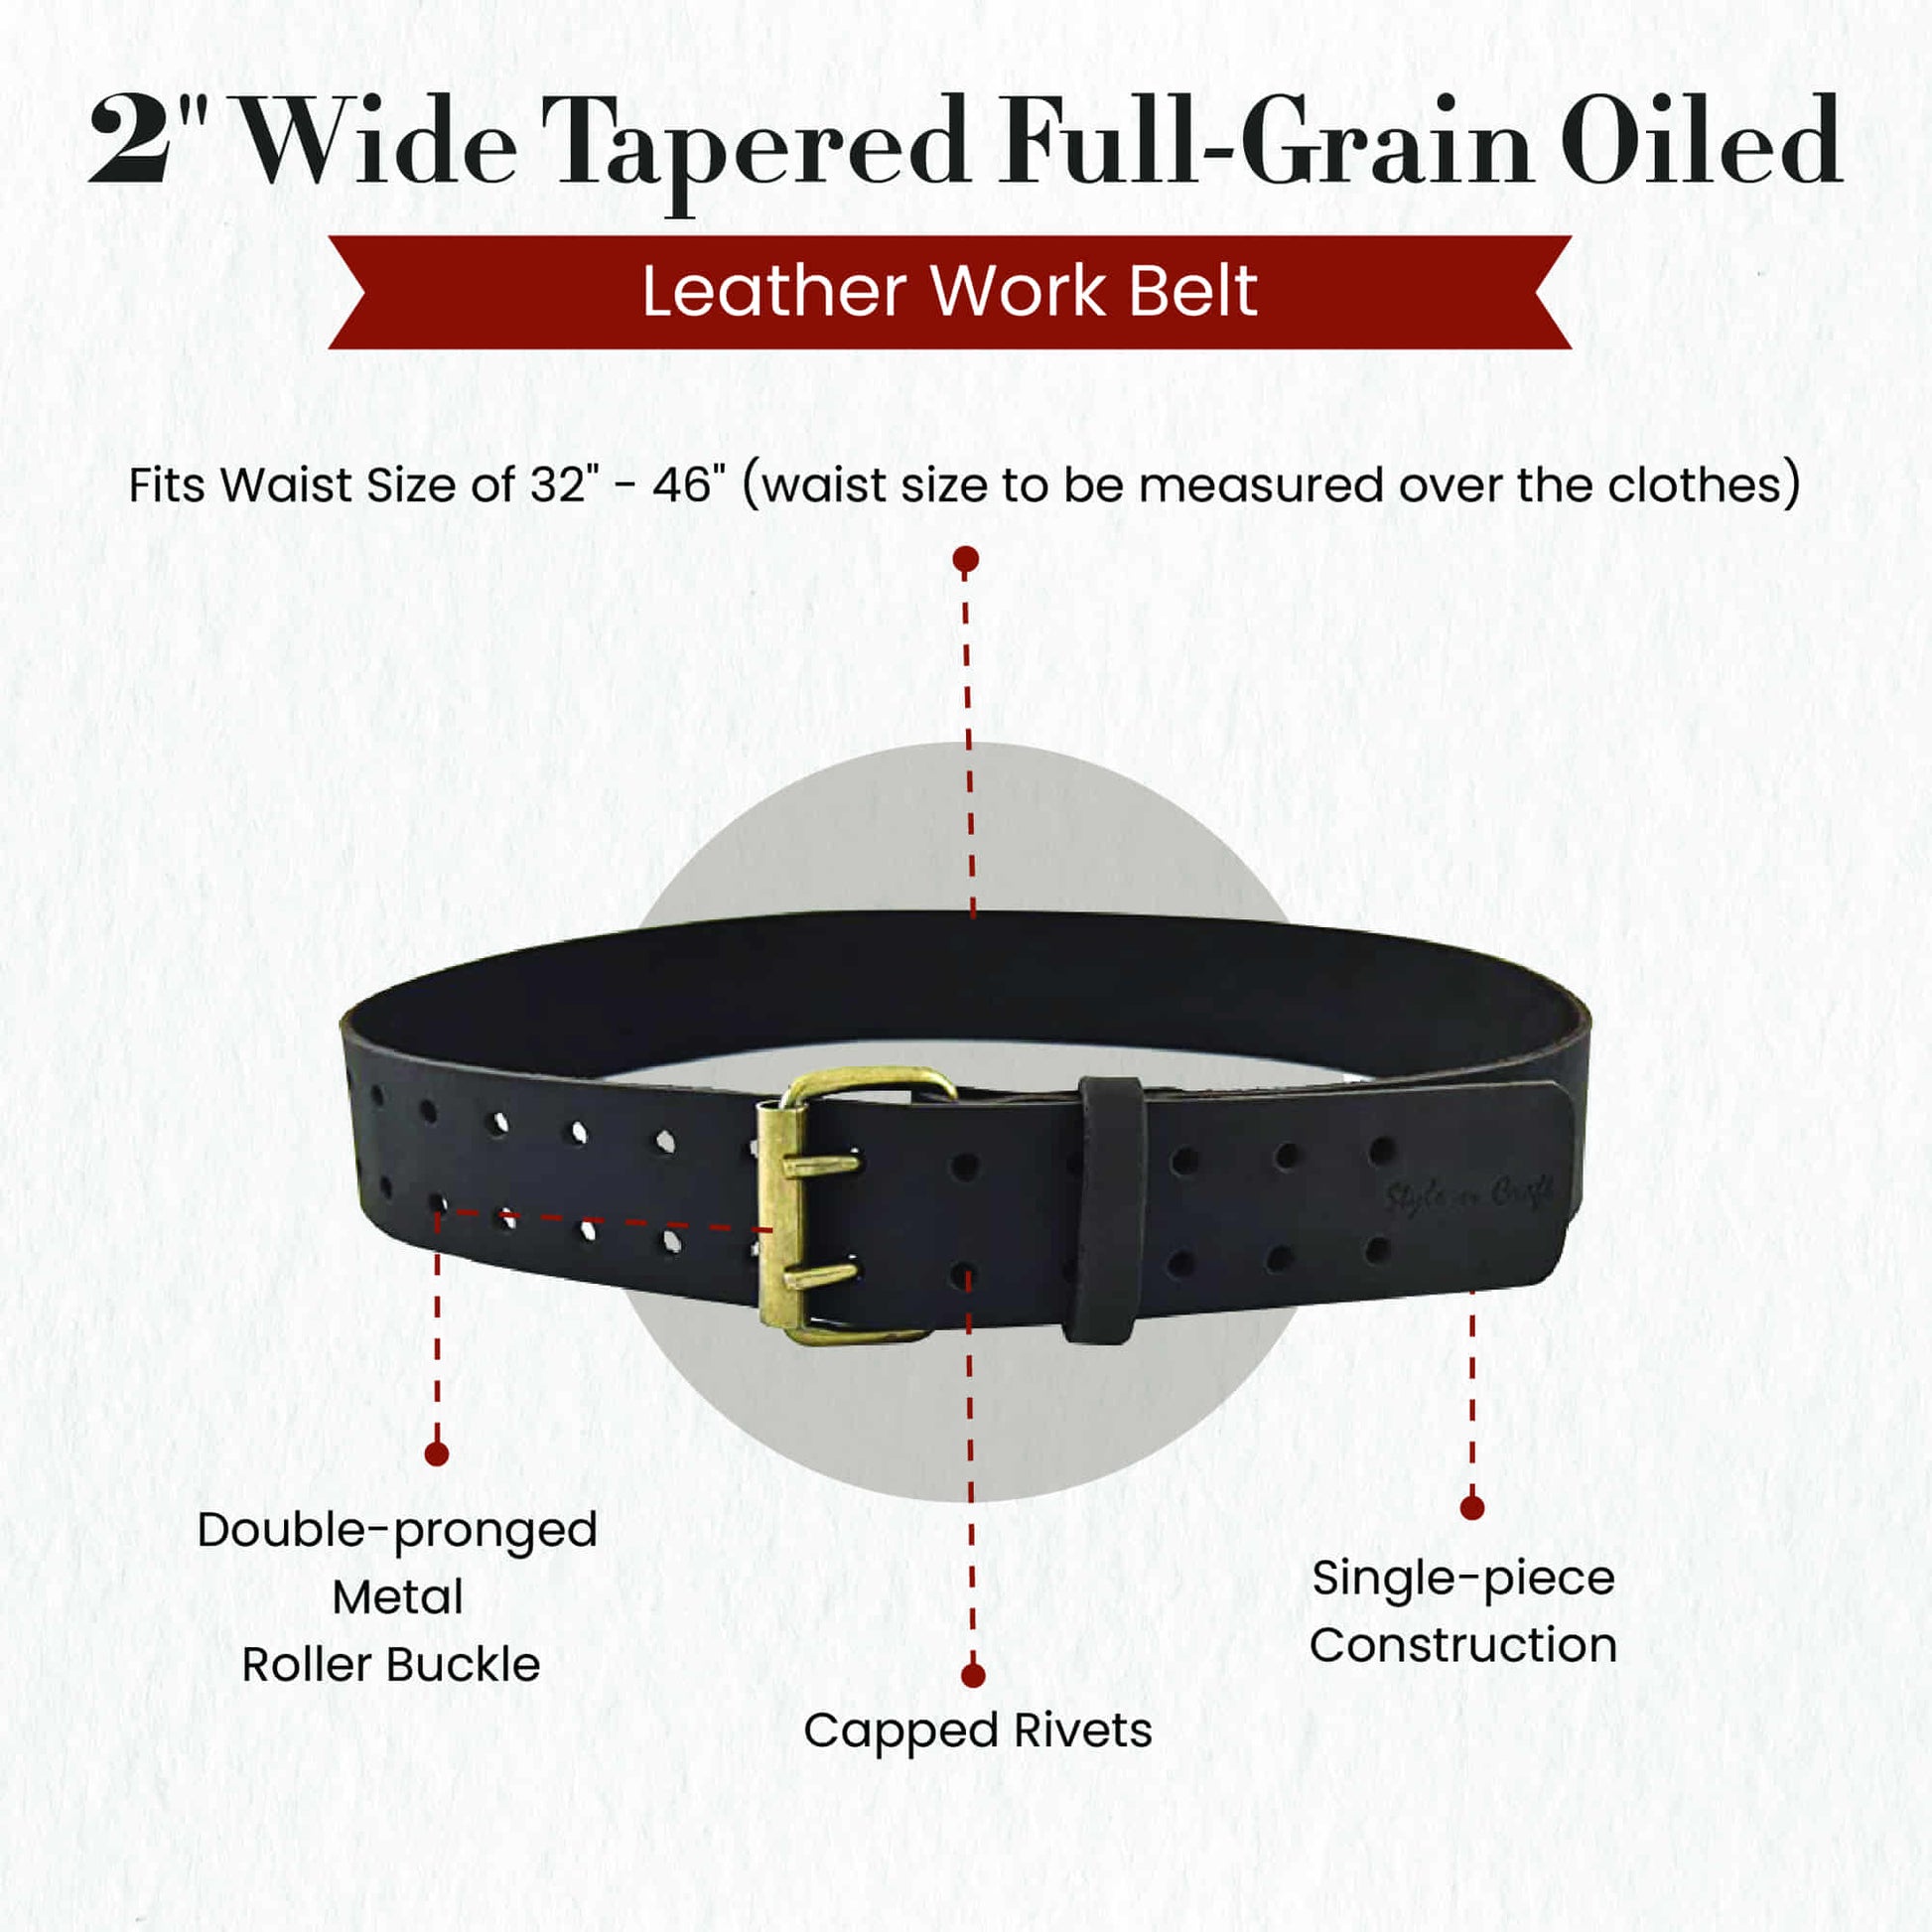 Style n Craft's 74052 - 2 Inch Wide Work Belt in Heavy Top Grain Oiled Leather in Dark Brown Color with Double Prong Metal Roller Buckle - Front View Showing Details